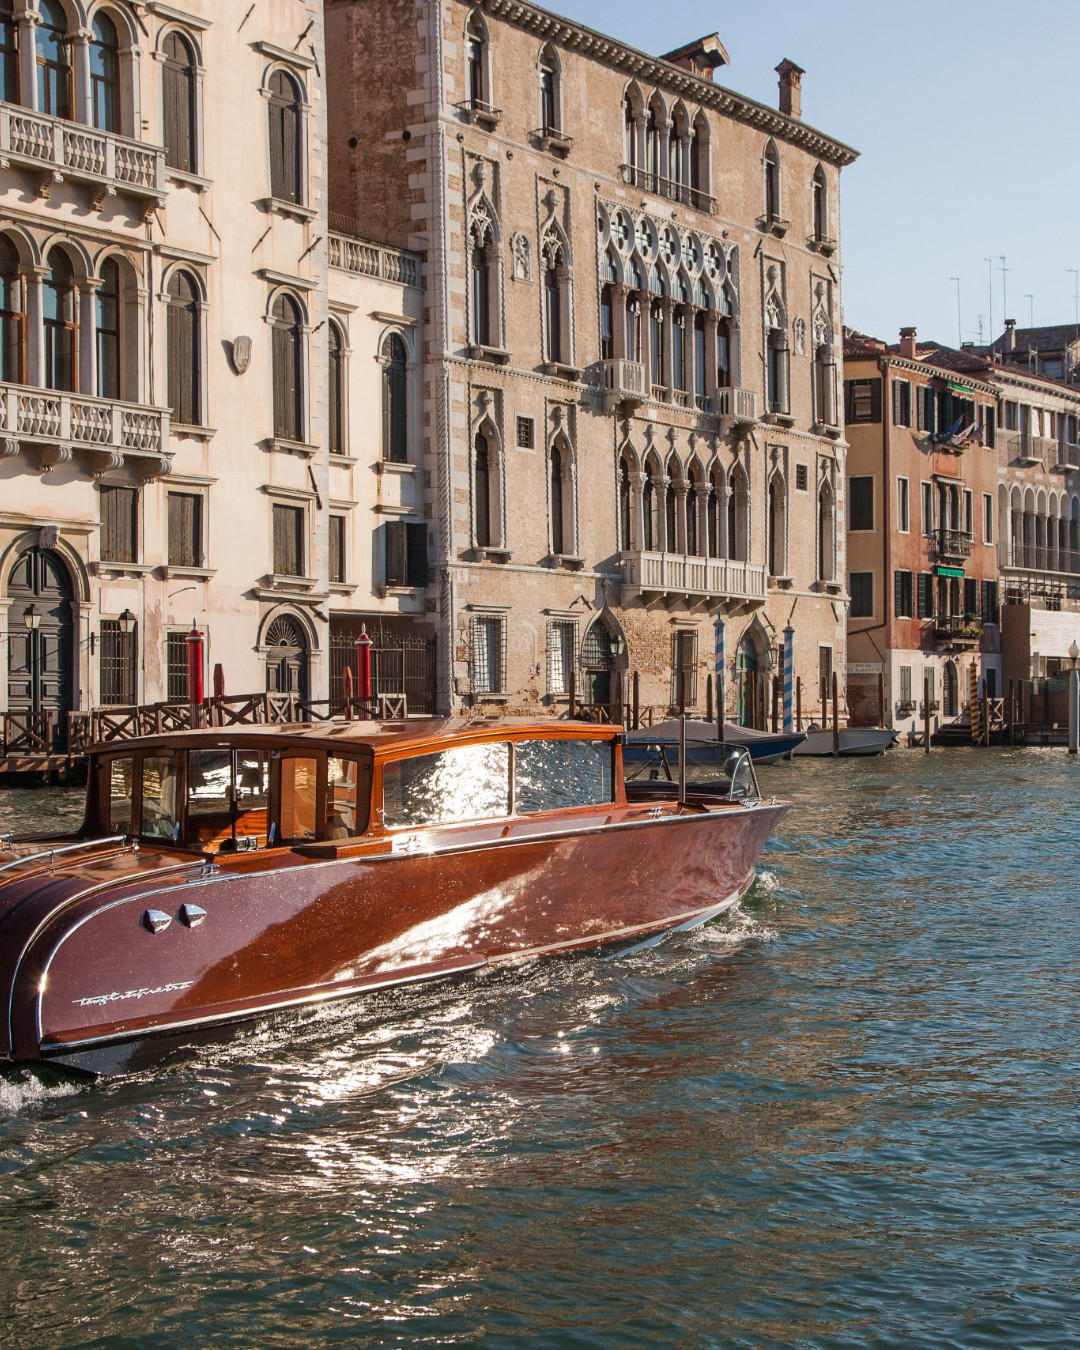 Aman Venice - The Aman boat glides along the Grand Canal, past historic buildings that have watched